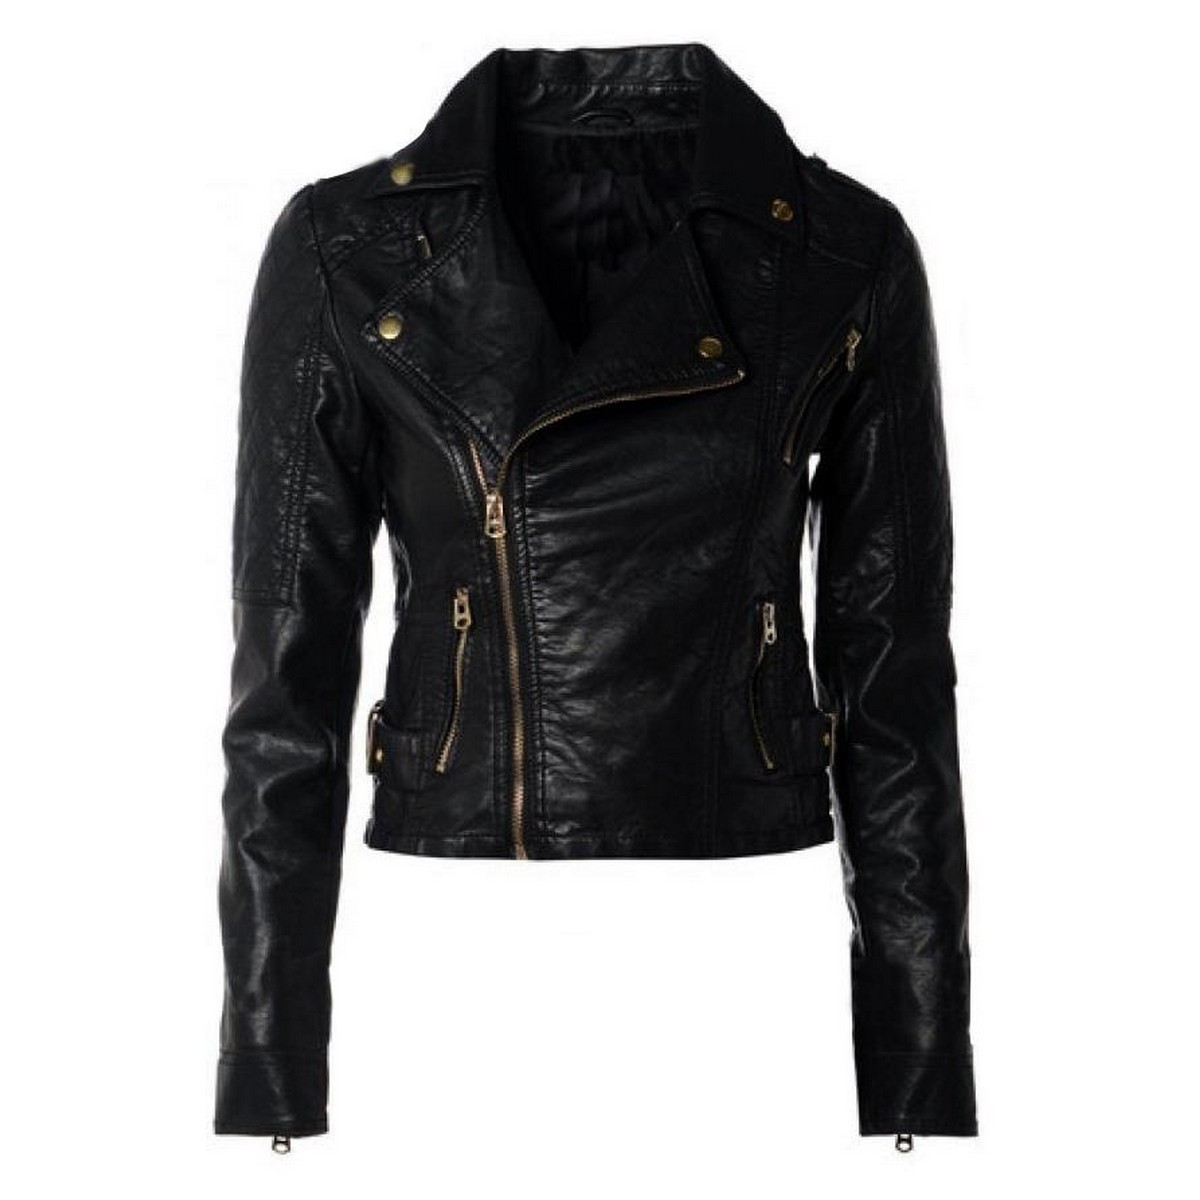 Black Ladies Leather Jacket For Women Price in Pakistan - View Latest ...